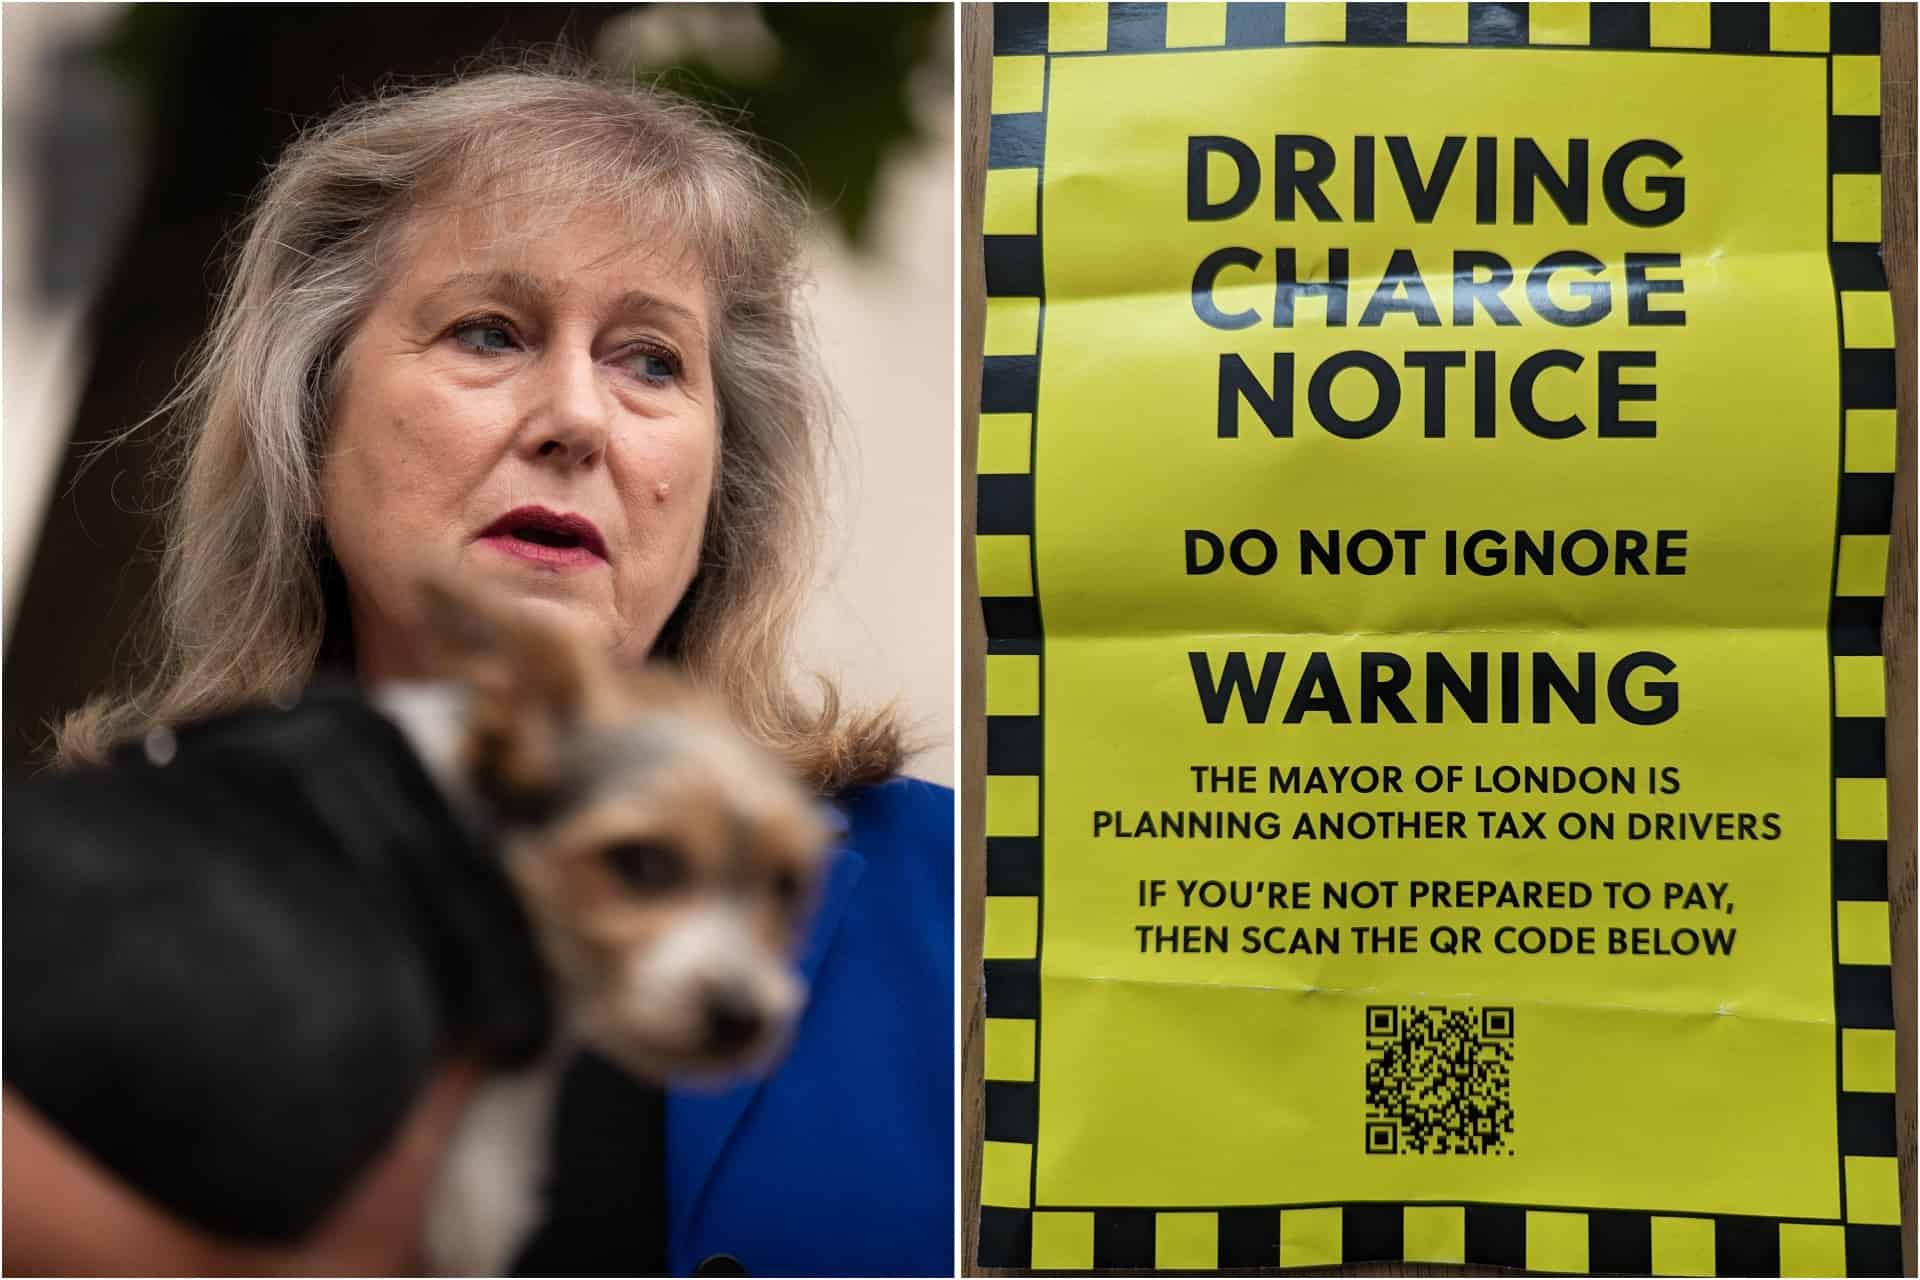 Tory campaign leaflets disguised as ‘driving charge notices’ mailed ahead of local elections